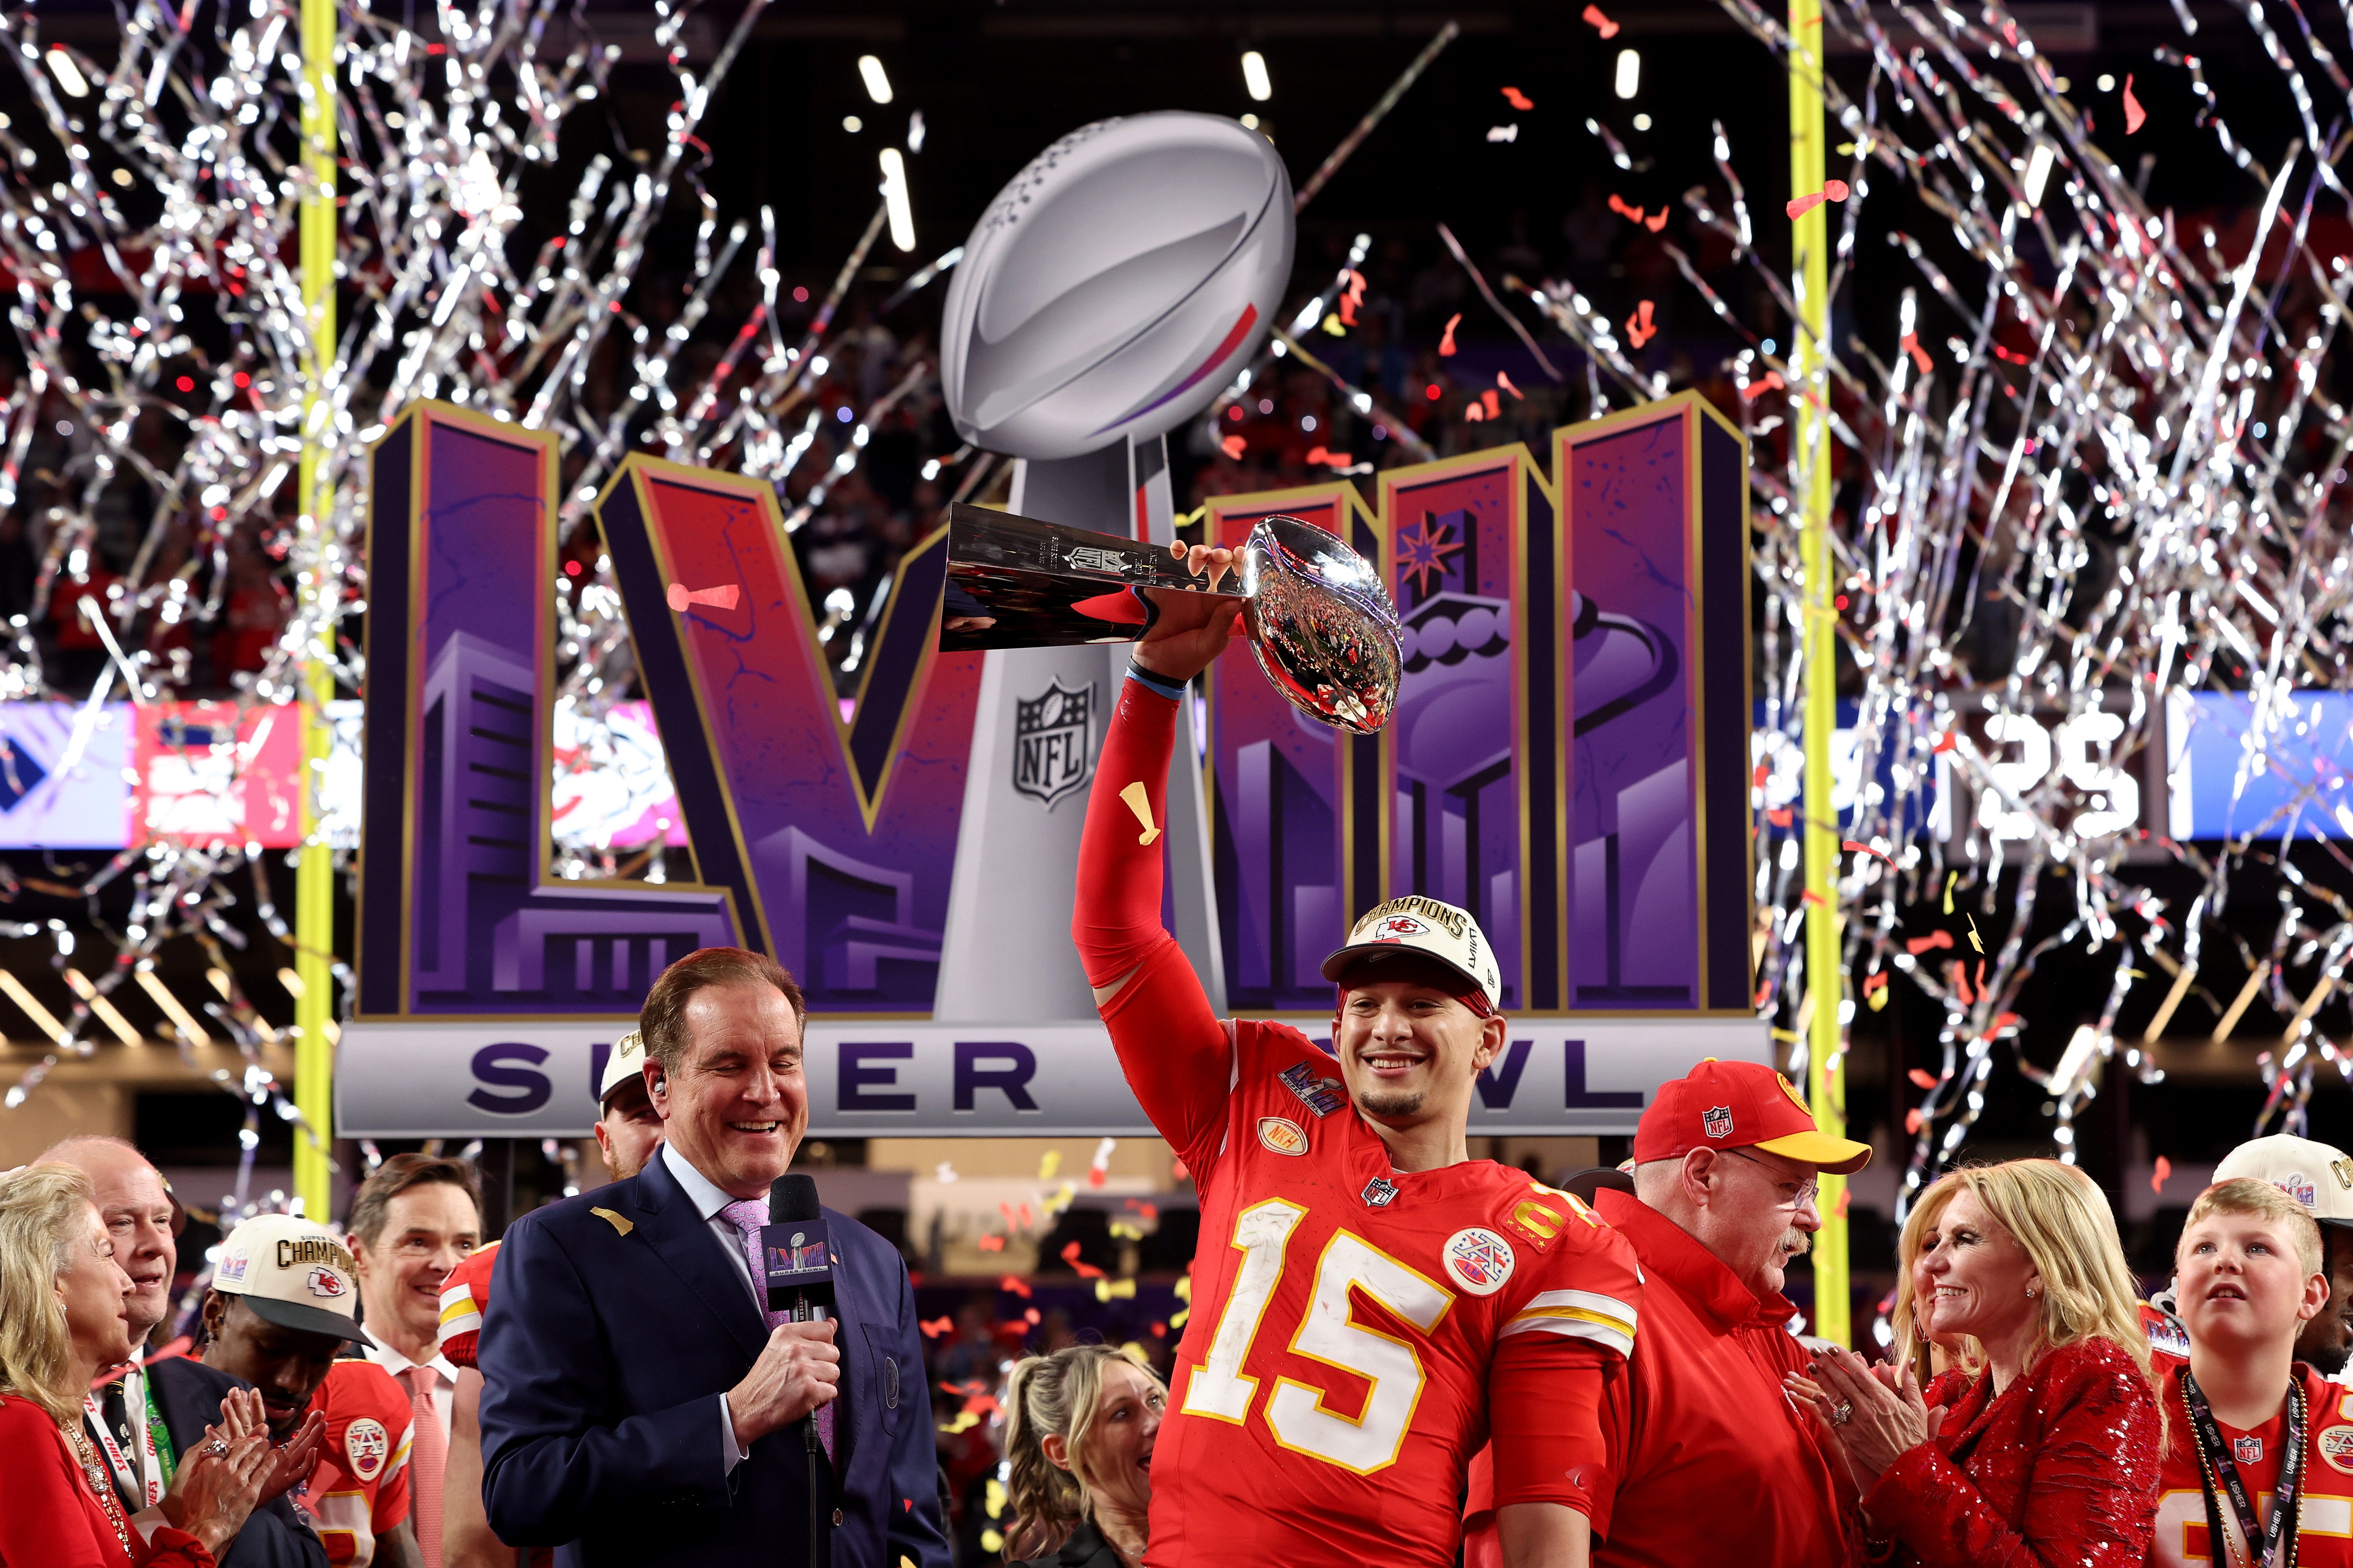 Patrick Mahomes #15 of the Kansas City Chiefs holds the Lombardi Trophy after defeating the San Francisco 49ers 25-22 during Super Bowl LVIII at Allegiant Stadium on February 11, 2024 in Las Vegas, Nevada. 